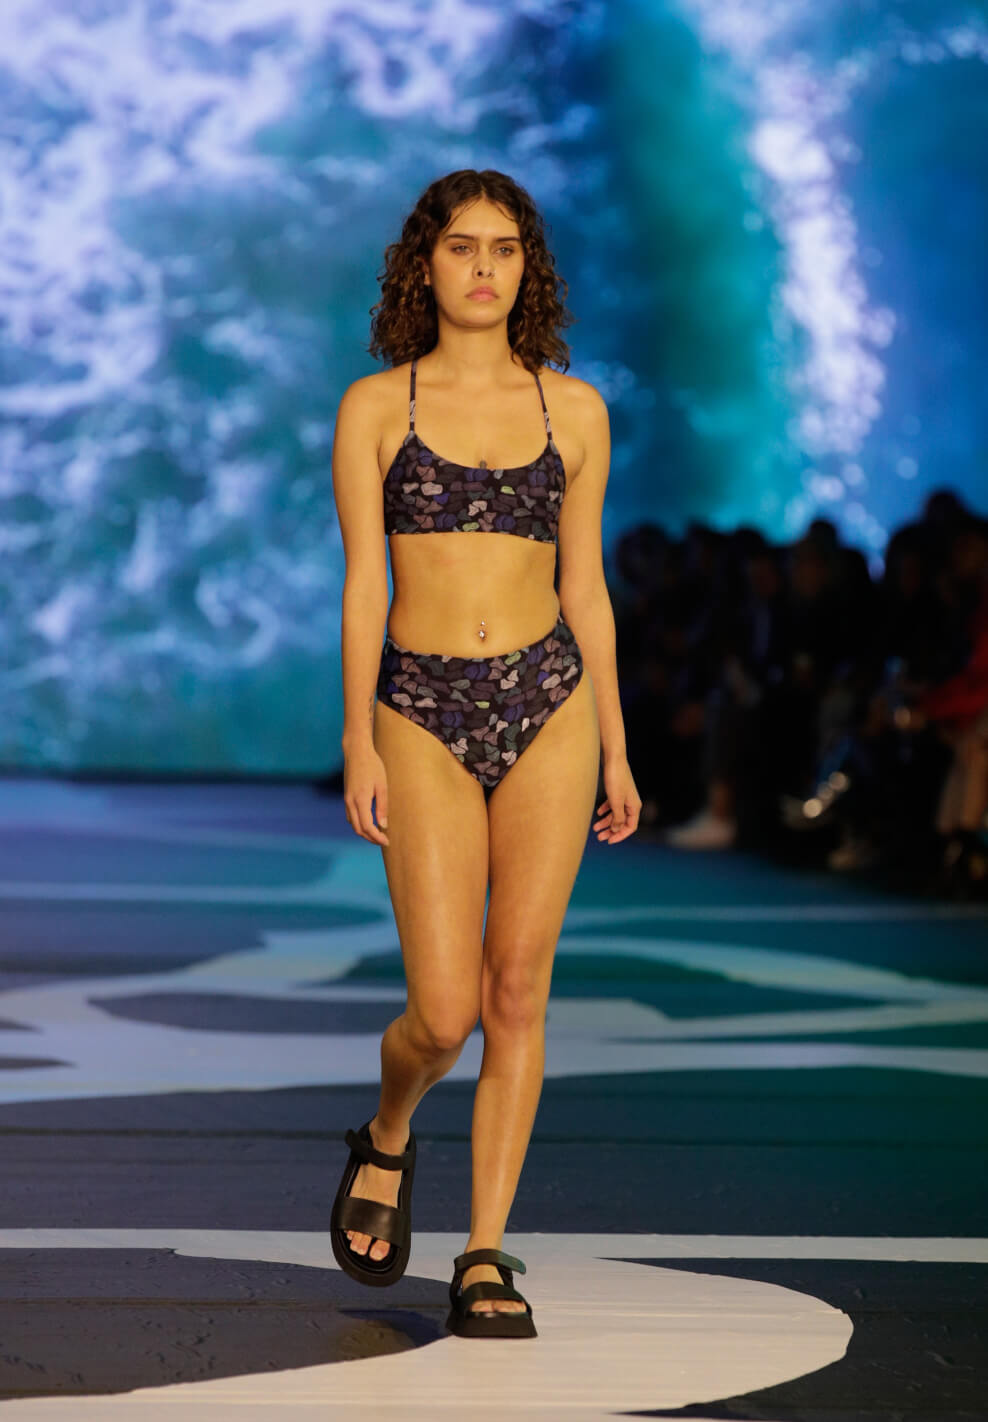 Just Landed: The First Nations Designer Resort Capsule Collection Liandra Swim Runway